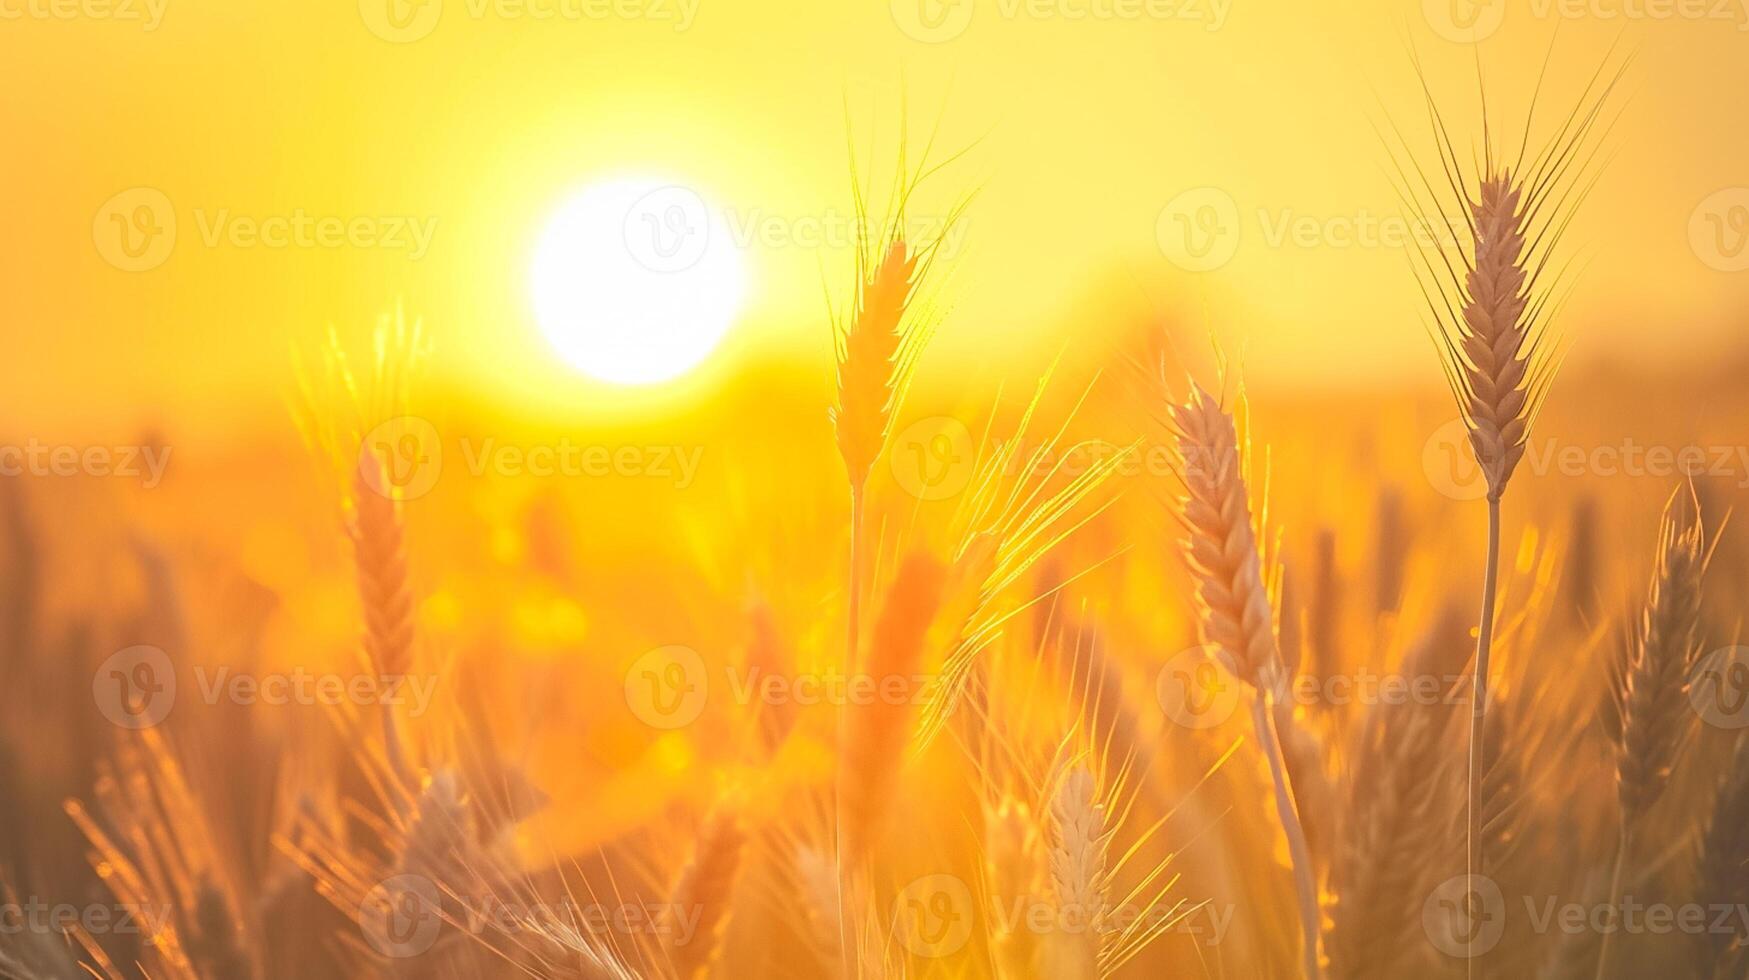 AI generated serene image captures peaceful scene of wheat field at sunrise. The sun is visible, appearing as bright, golden orb amidst the wheat stalks Ai Generated photo